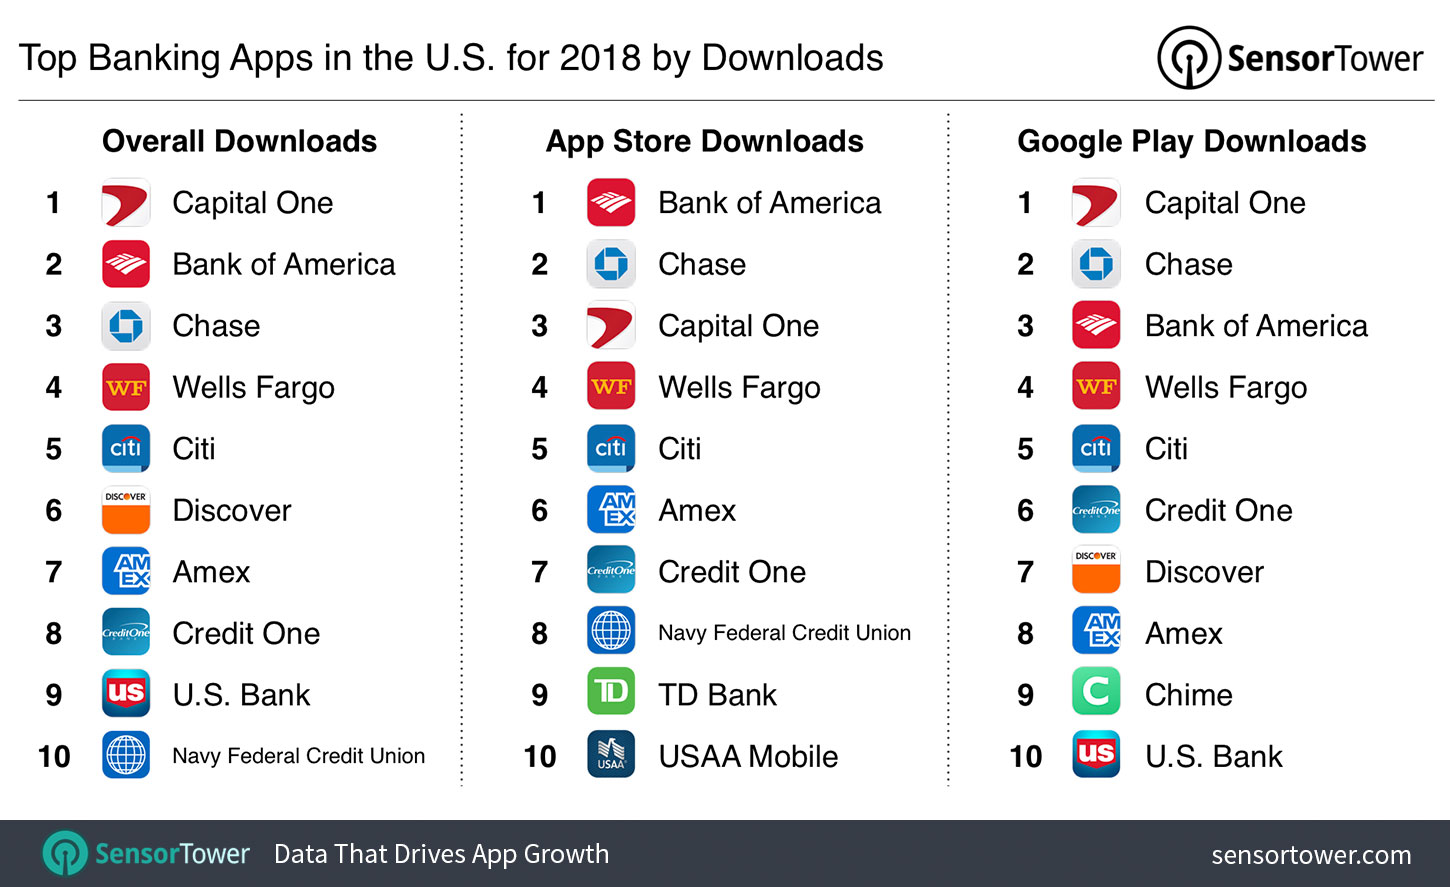 Top Banking Apps in the U.S. for 2018